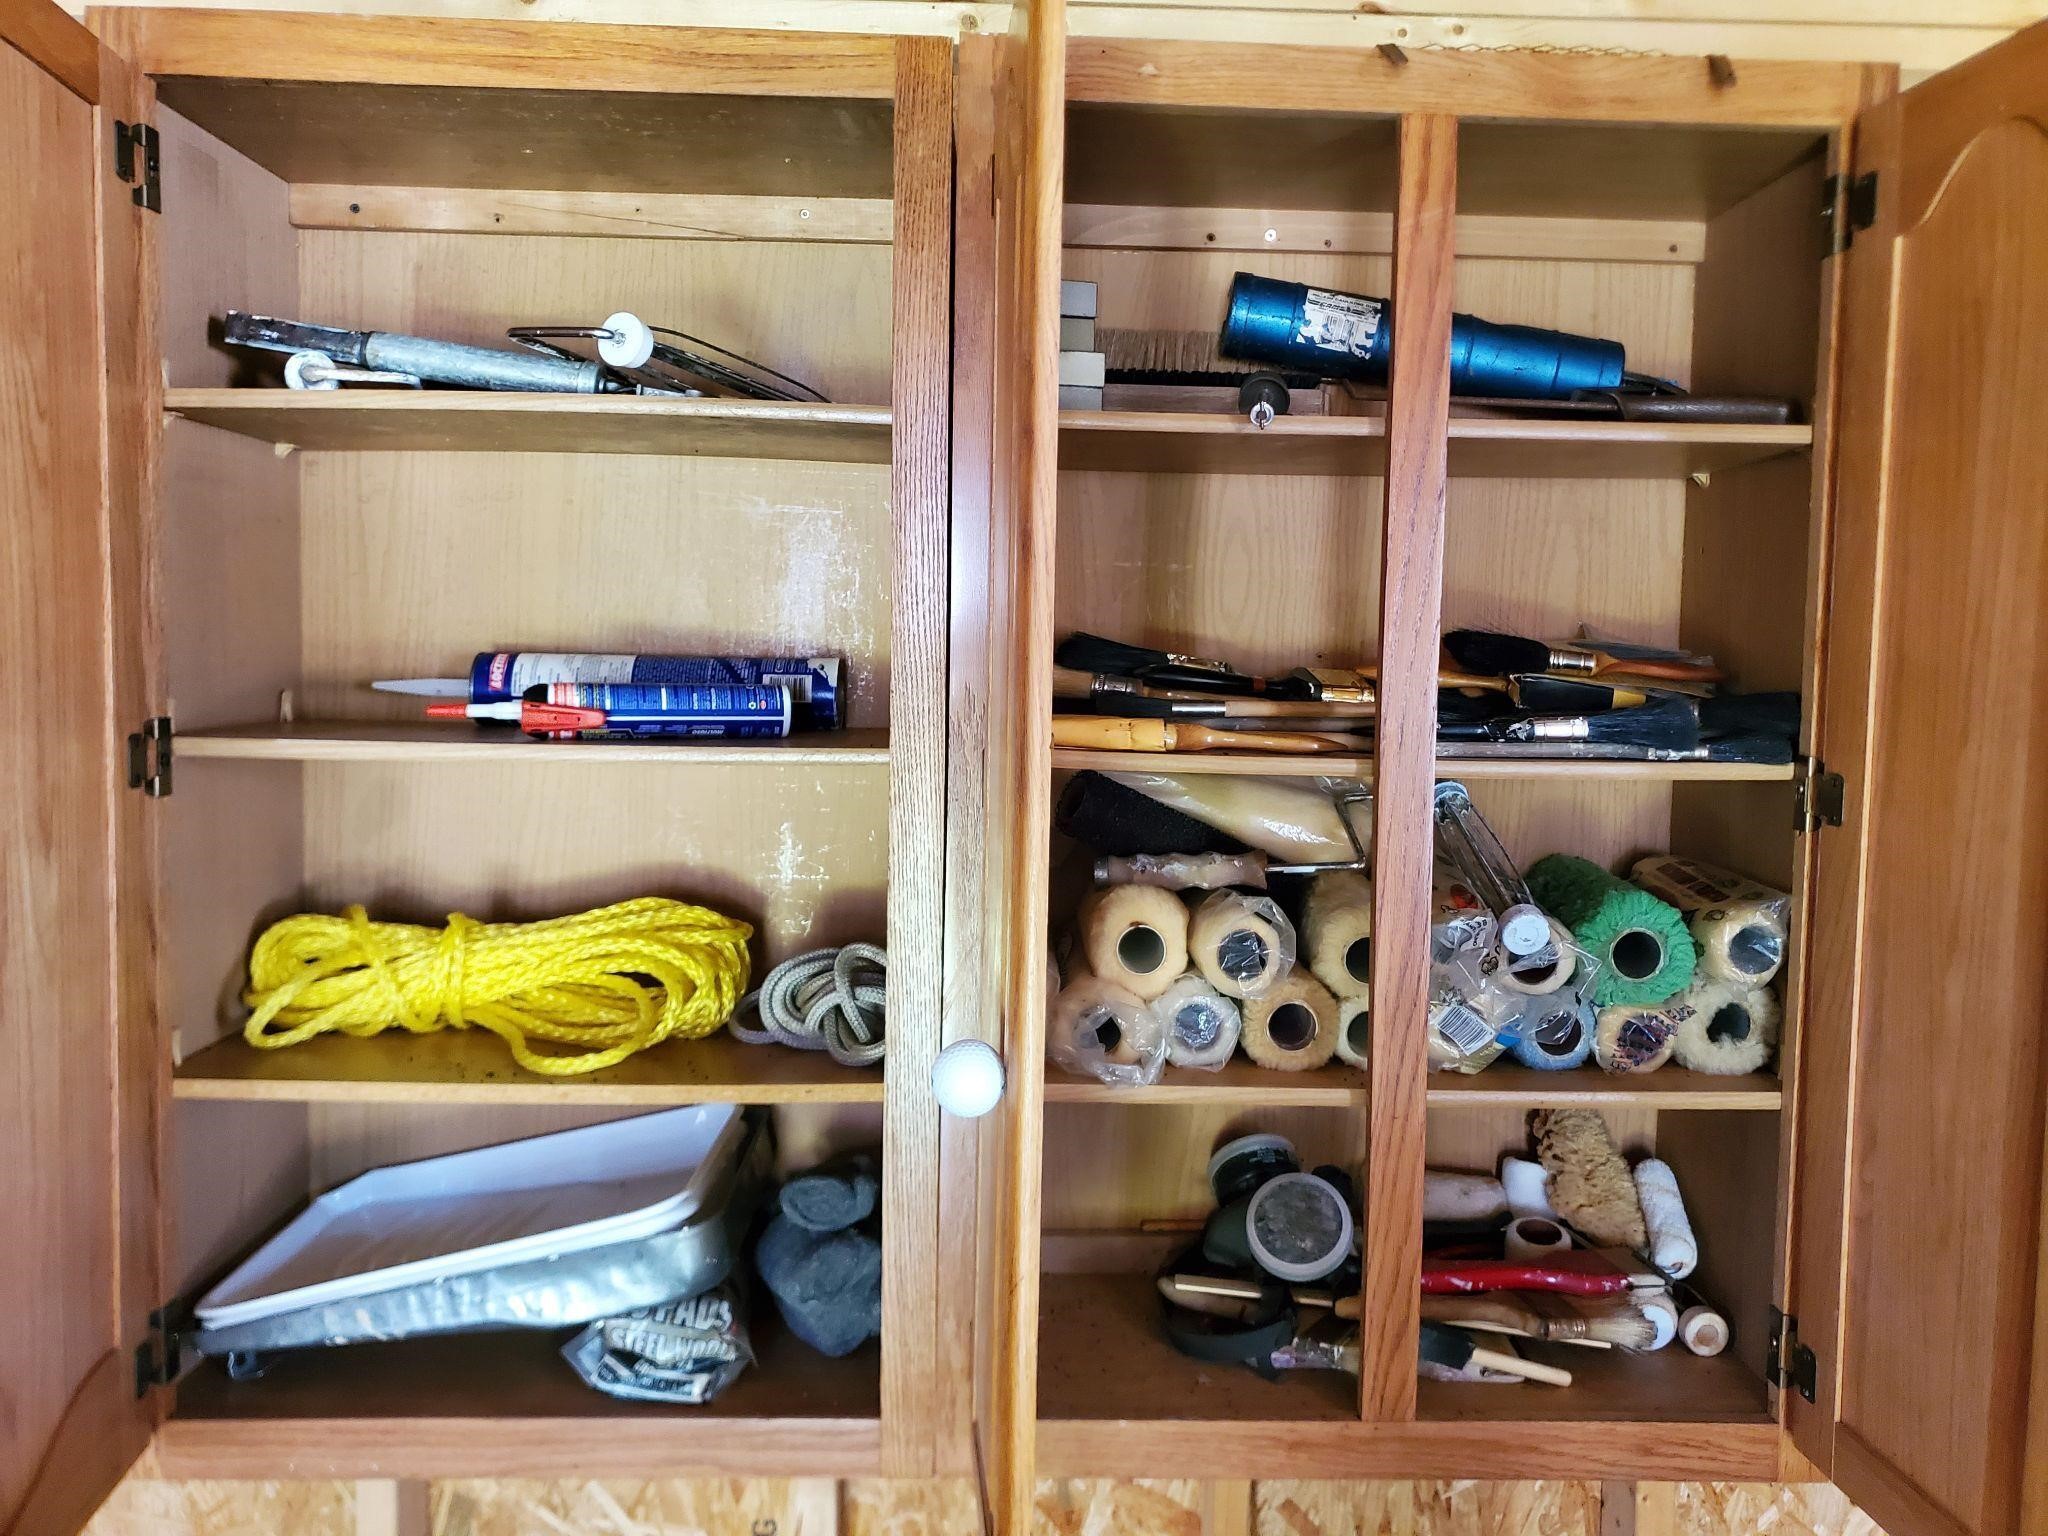 Contents in cabinet paint tools and supplies